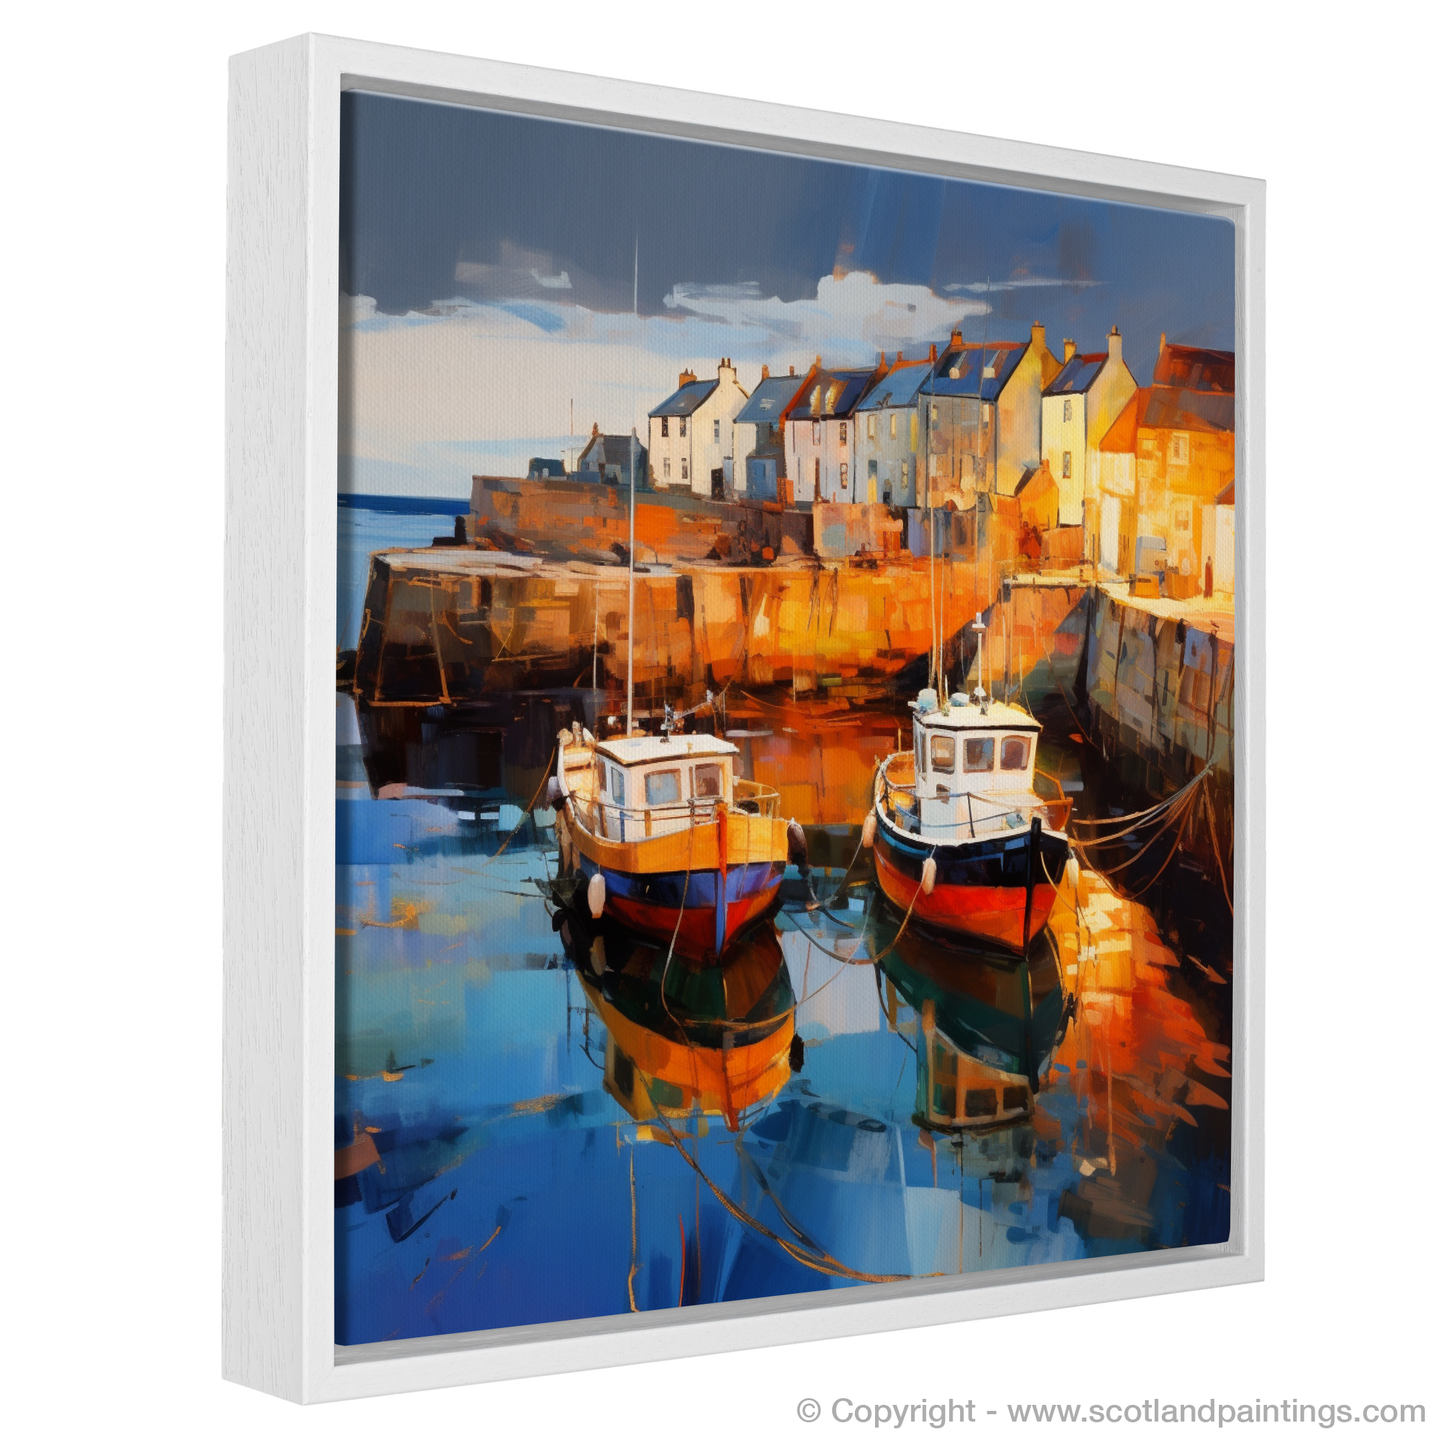 Painting and Art Print of Pittenweem Harbour at dusk entitled "Dusk Symphony at Pittenweem Harbour".